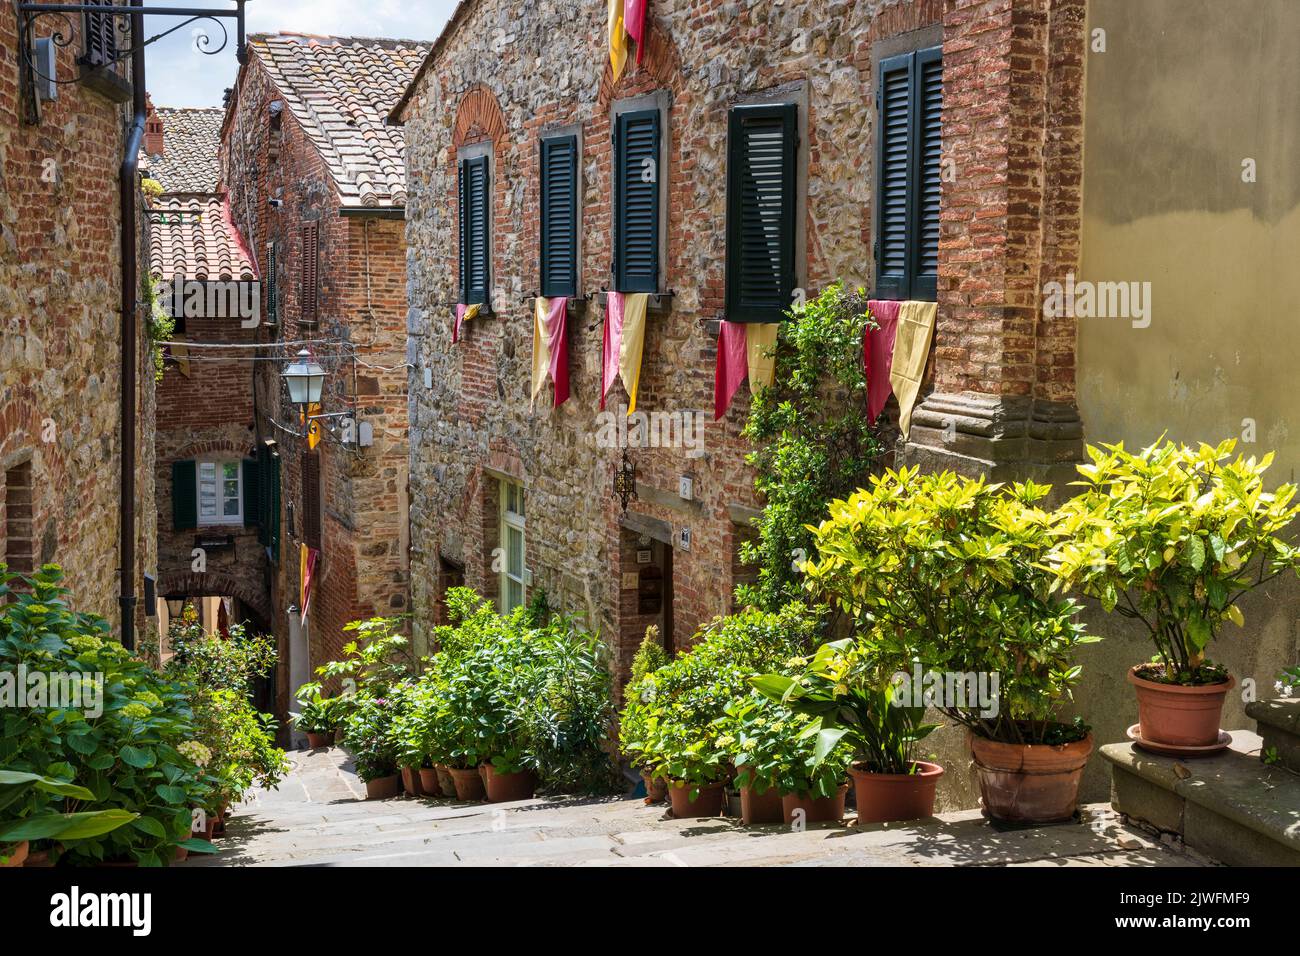 Potted plants line the steps in a narrow alleyway in the medieval hilltop town of Lucignano in the Val di Chiana in Tuscany, Italy Stock Photo